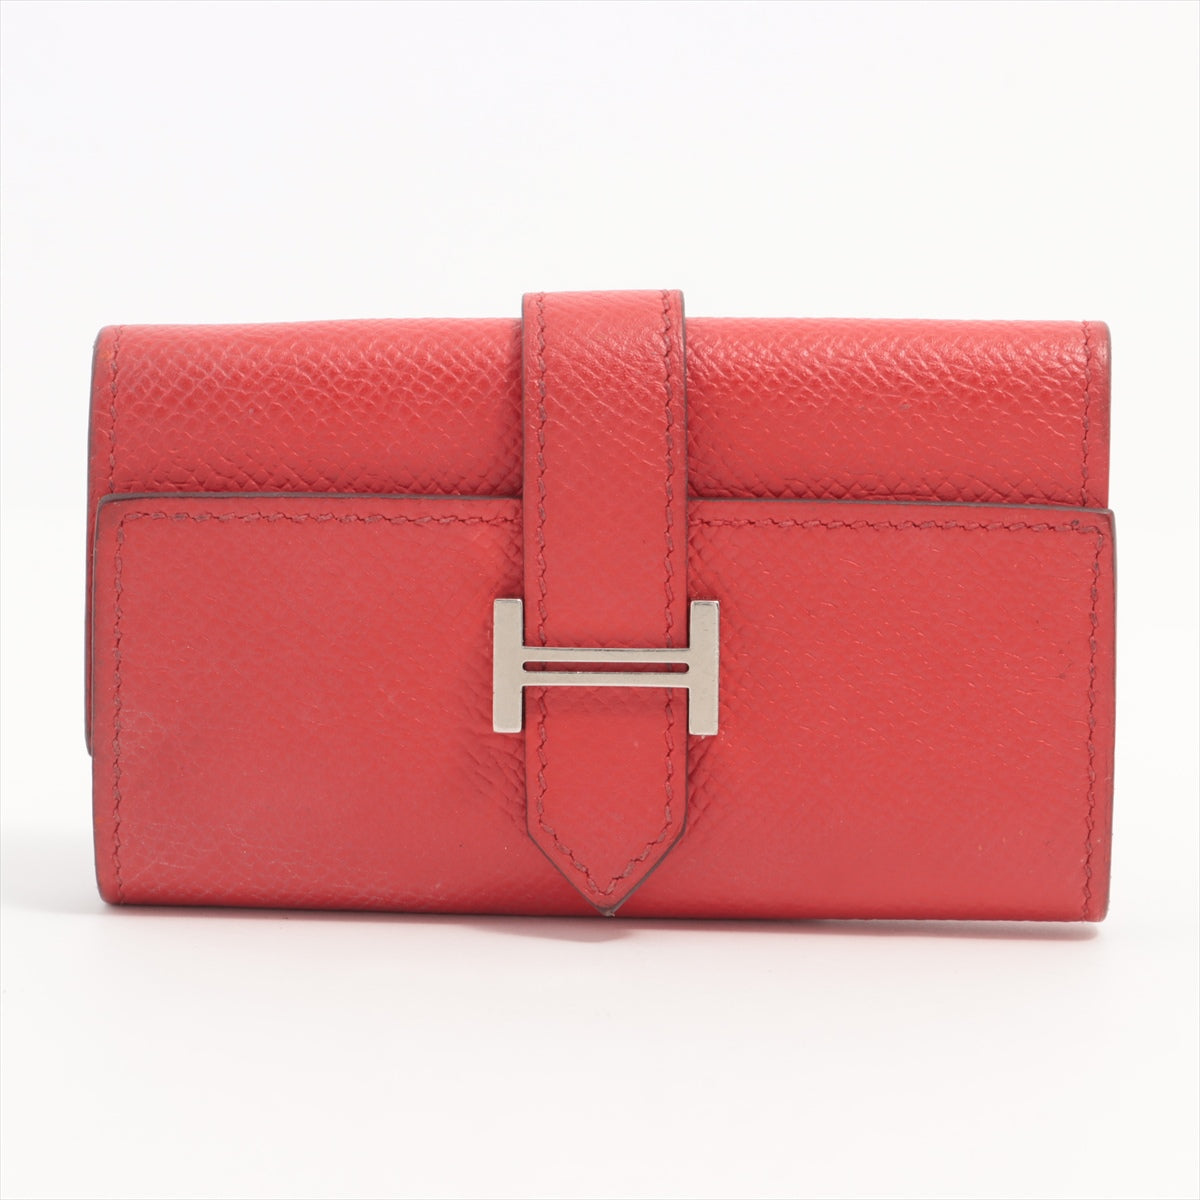 Hermès｜Page 240ALLU UK｜The Home of Pre-Loved Luxury Fashion